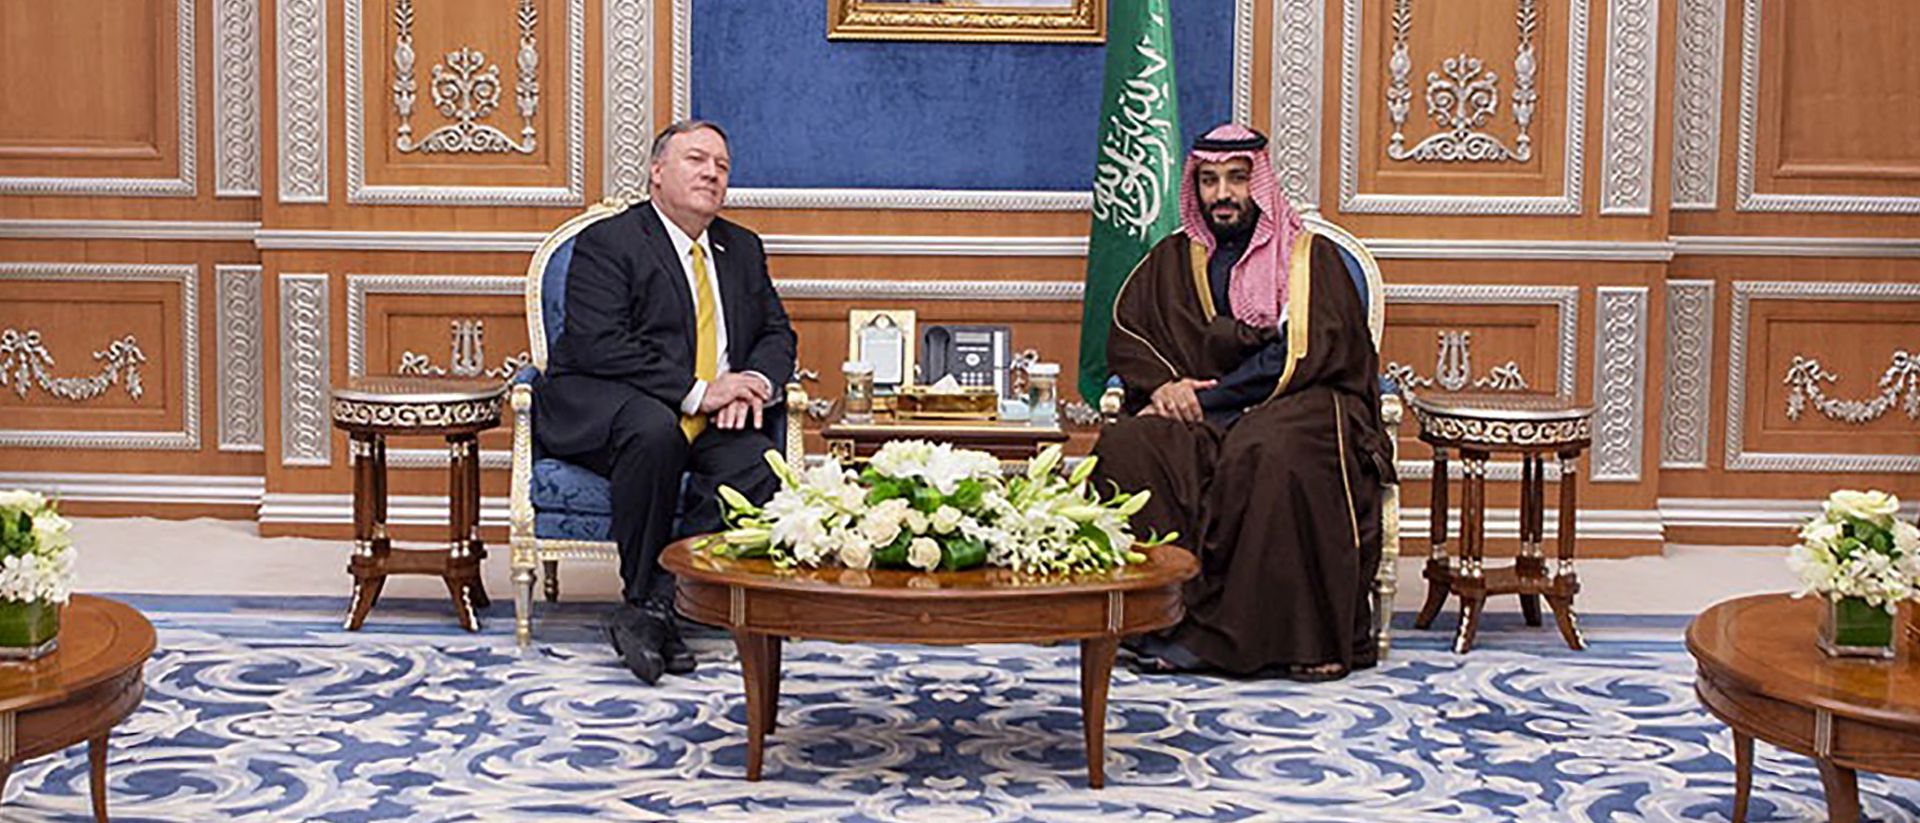 epa07282232 A handout photo made available by the Saudi Royal Court shows Saudi Crown Prince Mohammad Bin Salman (C-R) meeting with US Secretary of State Mike Pompeo (C-L) in Riyadh, Saudi Arabia, 14 January 2019. Pompeo arrived in Saudi Arabia on 13 January evening following his visit to Qatar, UAE, Jordan, Egypt and Iraq. The trip came after the US announced it would withdraw its troops from Syria.  EPA/BANDAR ALGALOUD/SAUDI ROYAL COURT HANDOUT  HANDOUT EDITORIAL USE ONLY/NO SALES